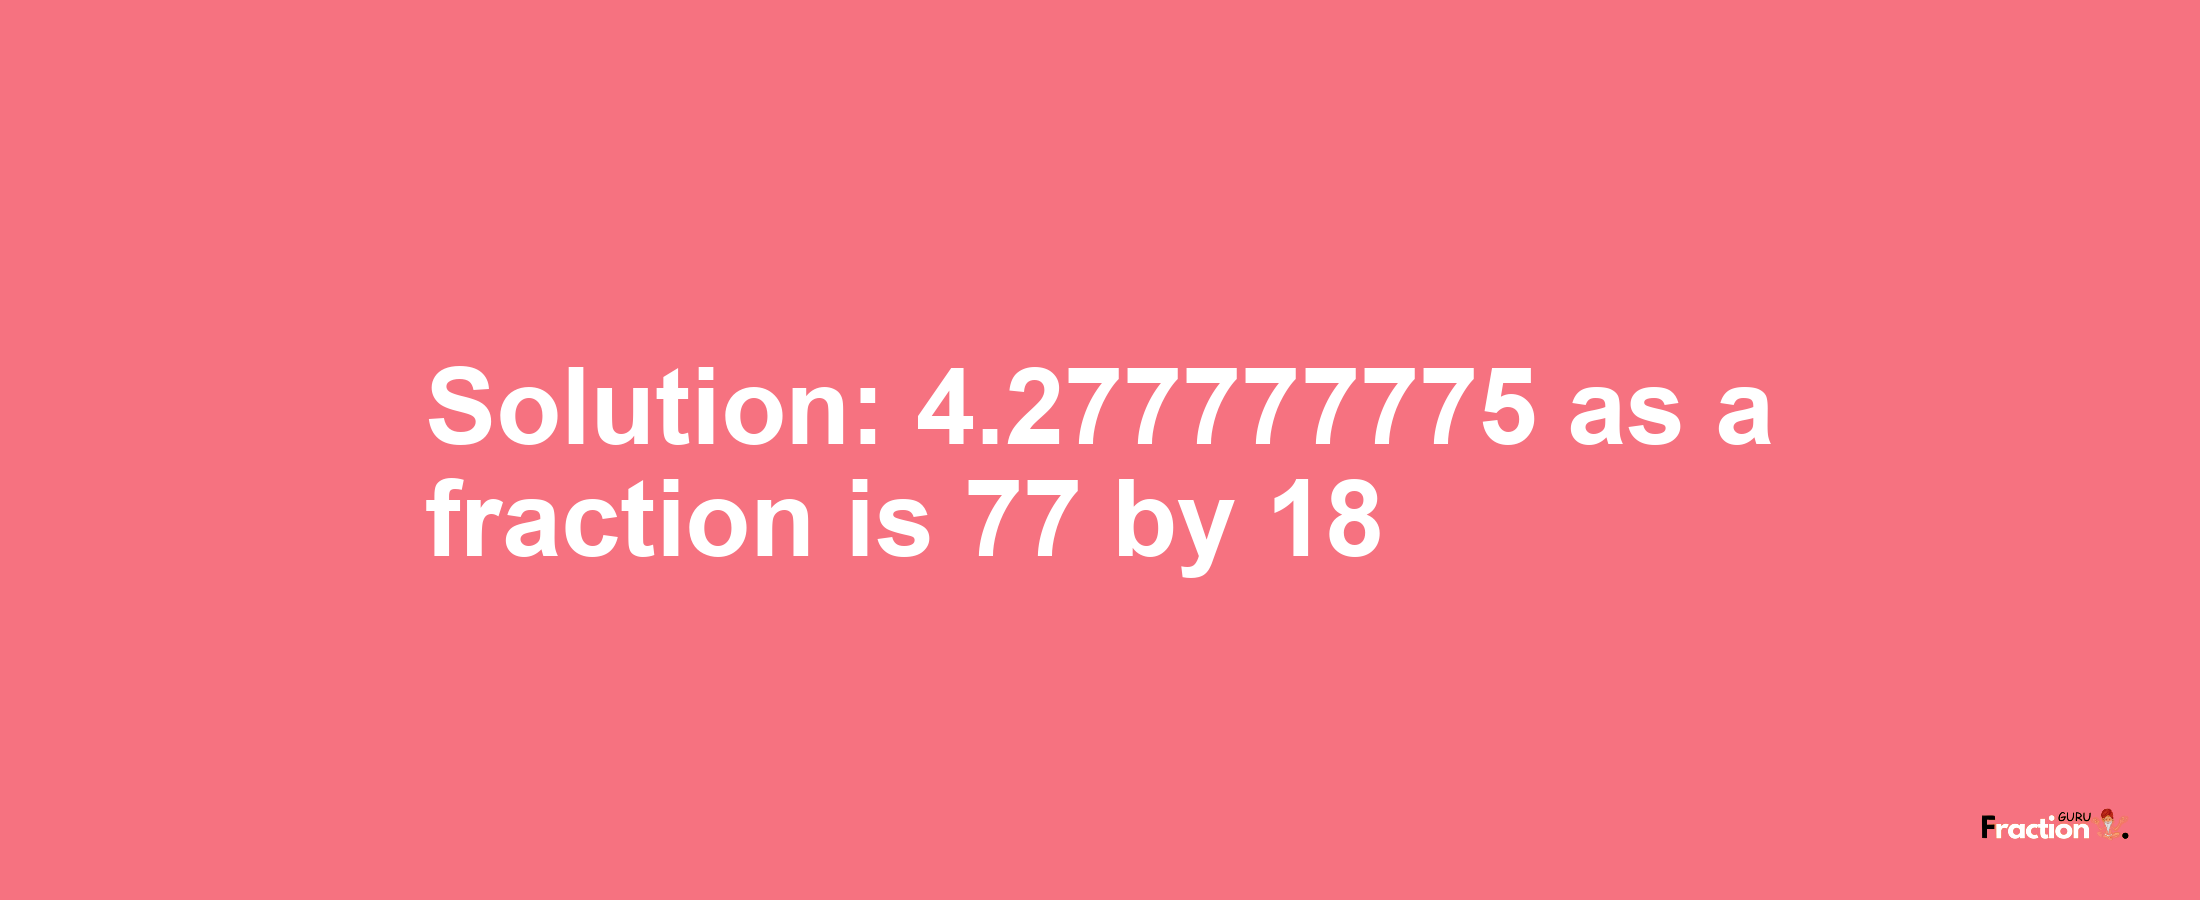 Solution:4.277777775 as a fraction is 77/18